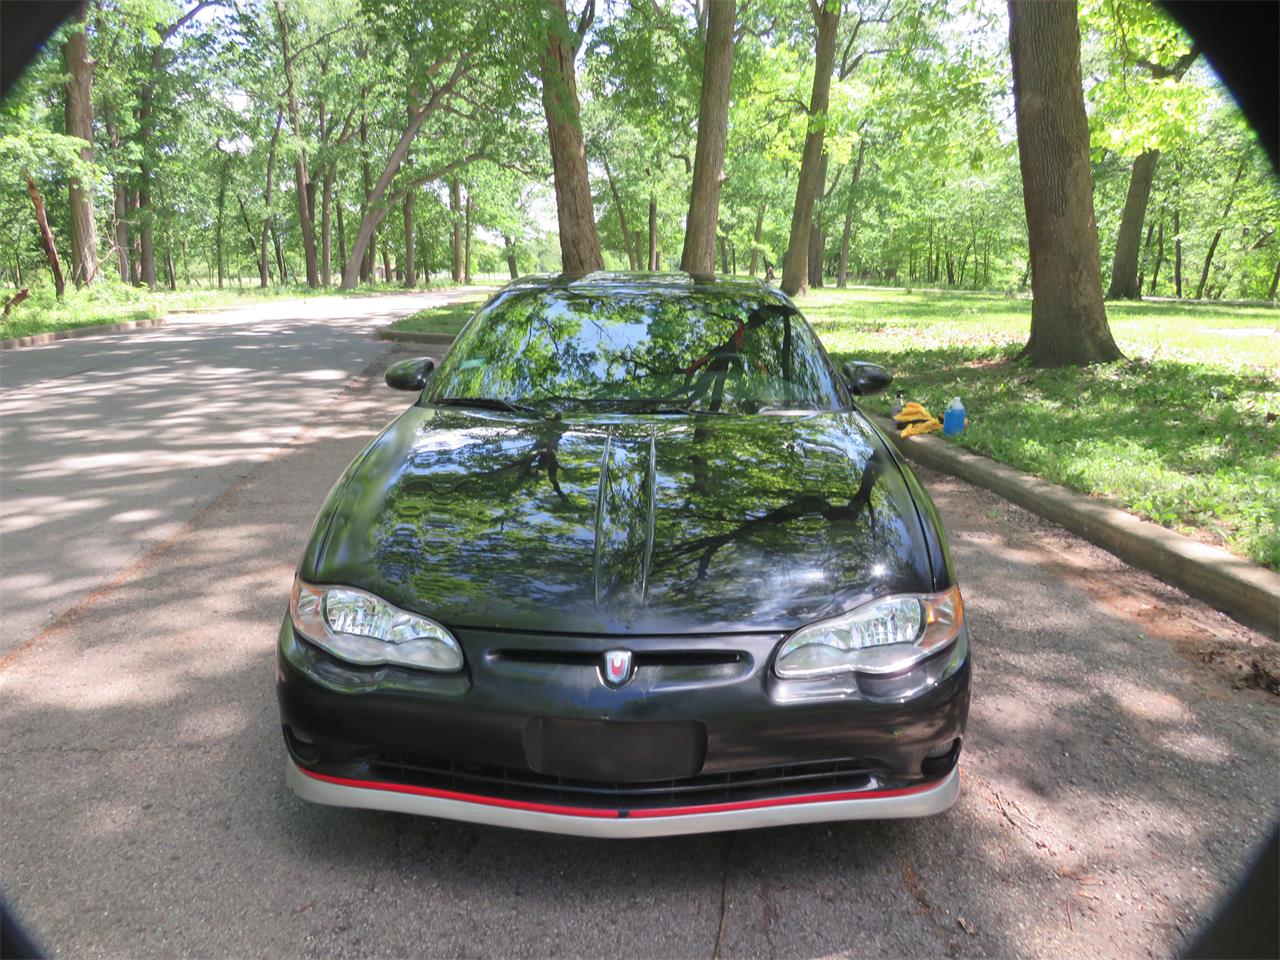 2002 Chevrolet Monte Carlo SS Intimidator in Chicago, Illinois